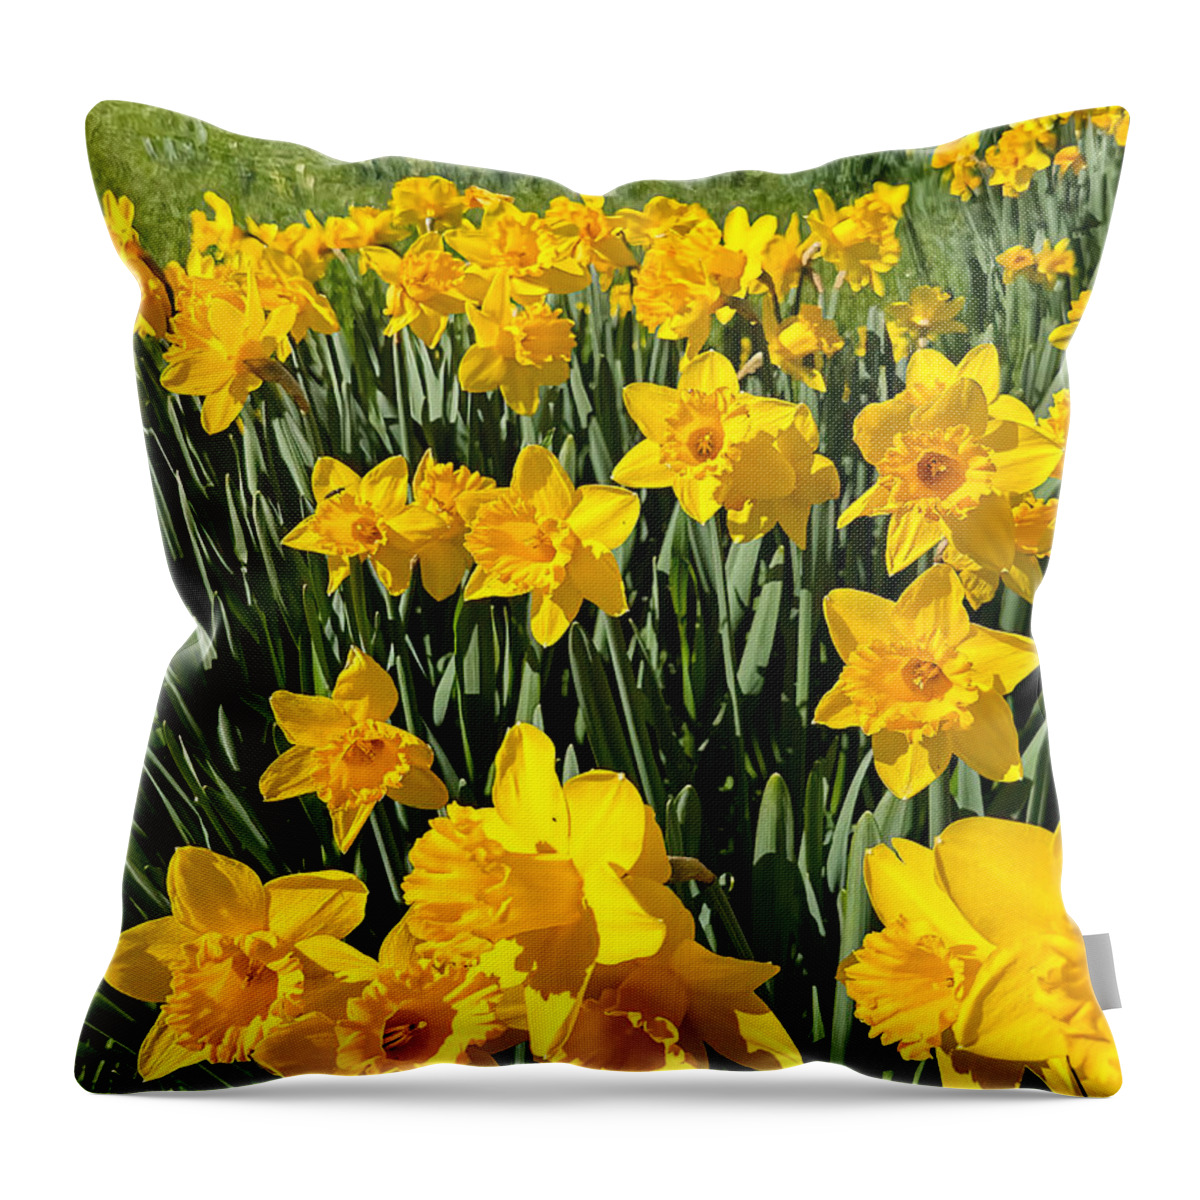 Daffodils Throw Pillow featuring the photograph Daffodil Dreams by Steph Gabler